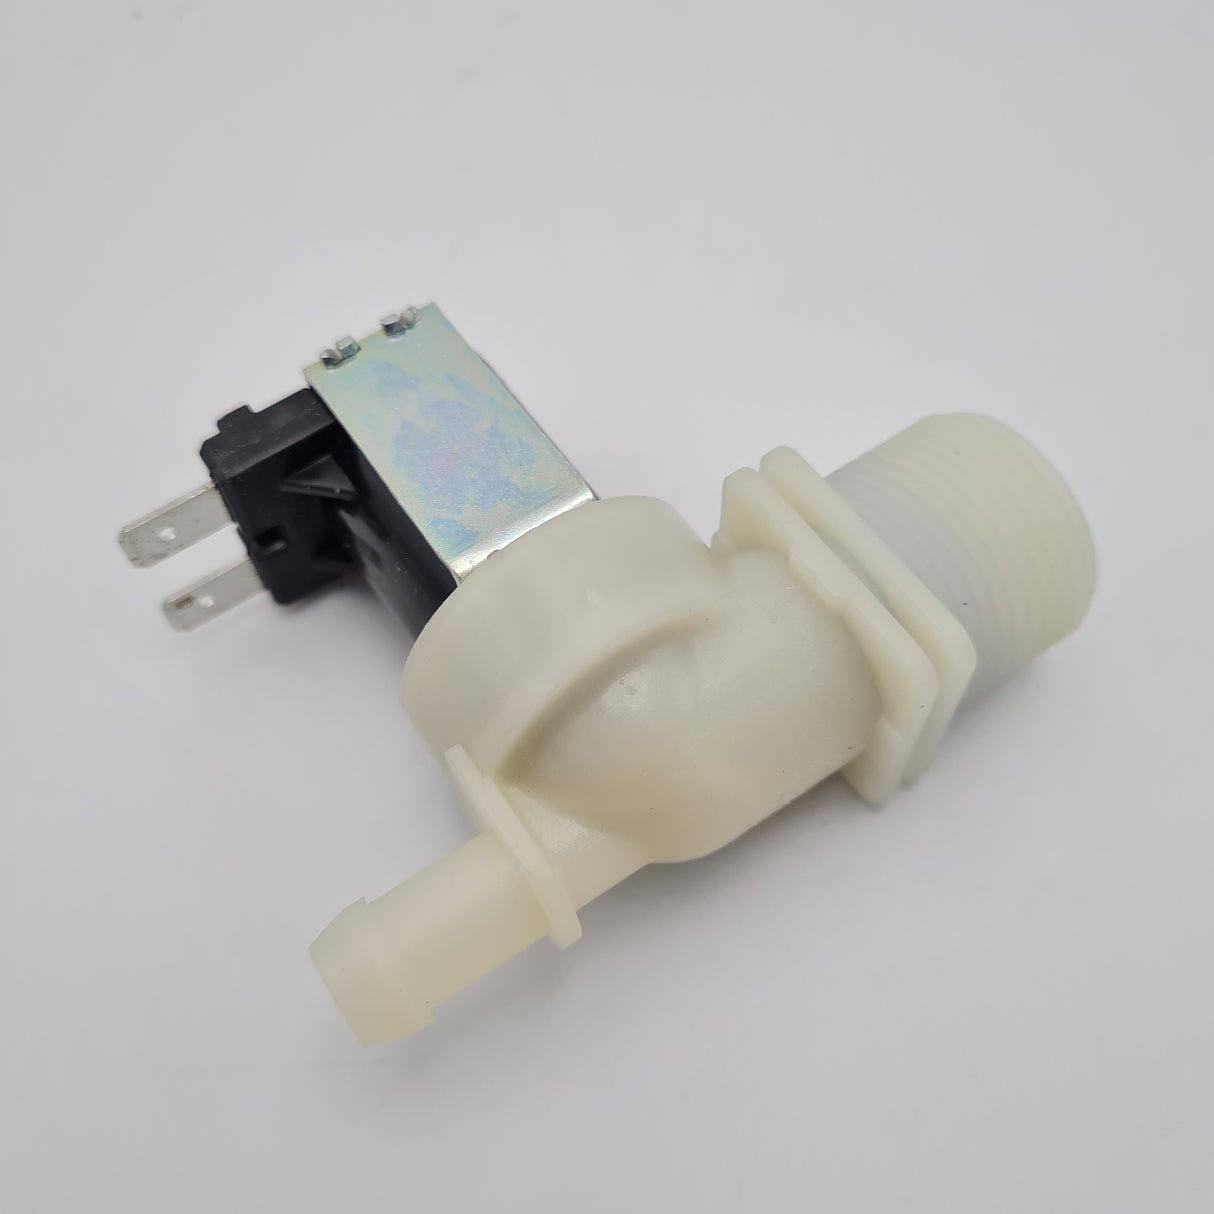 Dometic Toilet -Electric Magnetic Valve - Fits Many Models - 4450019707